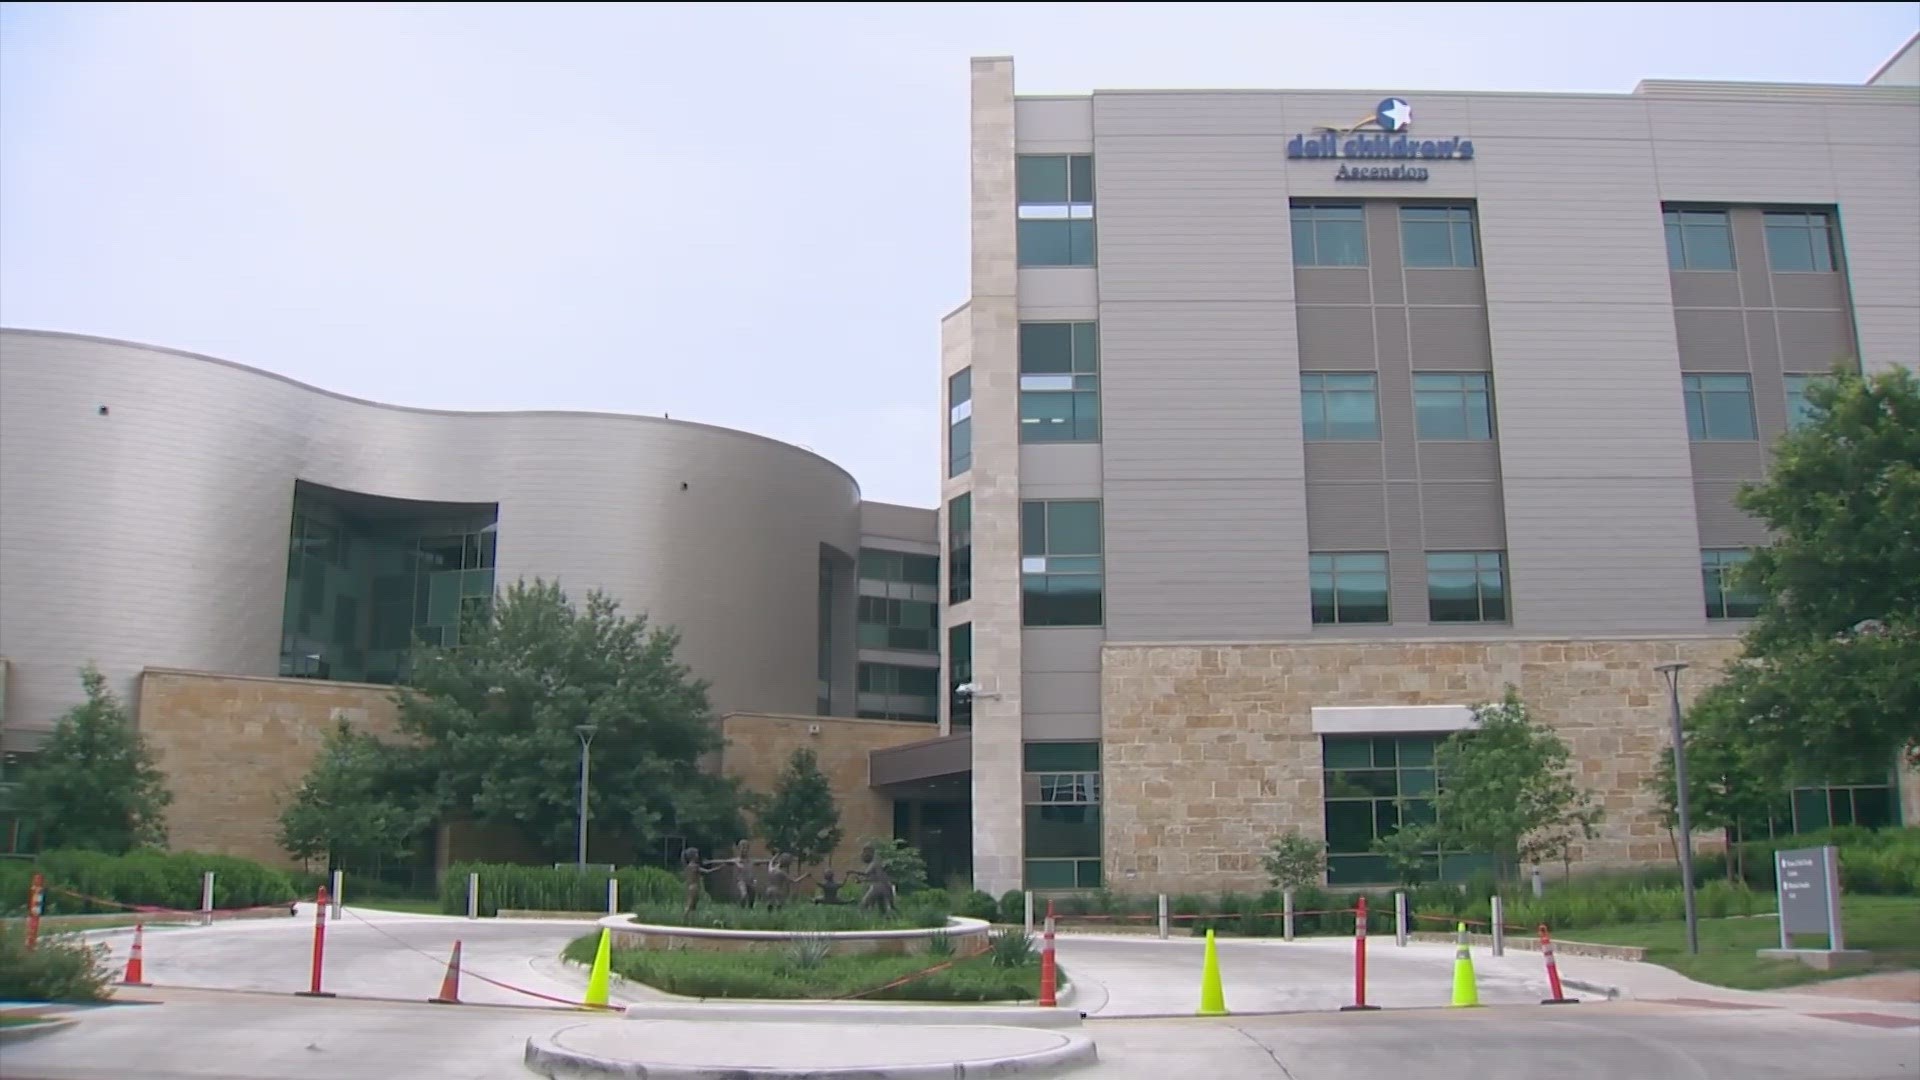 A big shakeup at Dell Children's is affecting many kinds of care at the adolescent clinic. Patients say they don't know what's next.